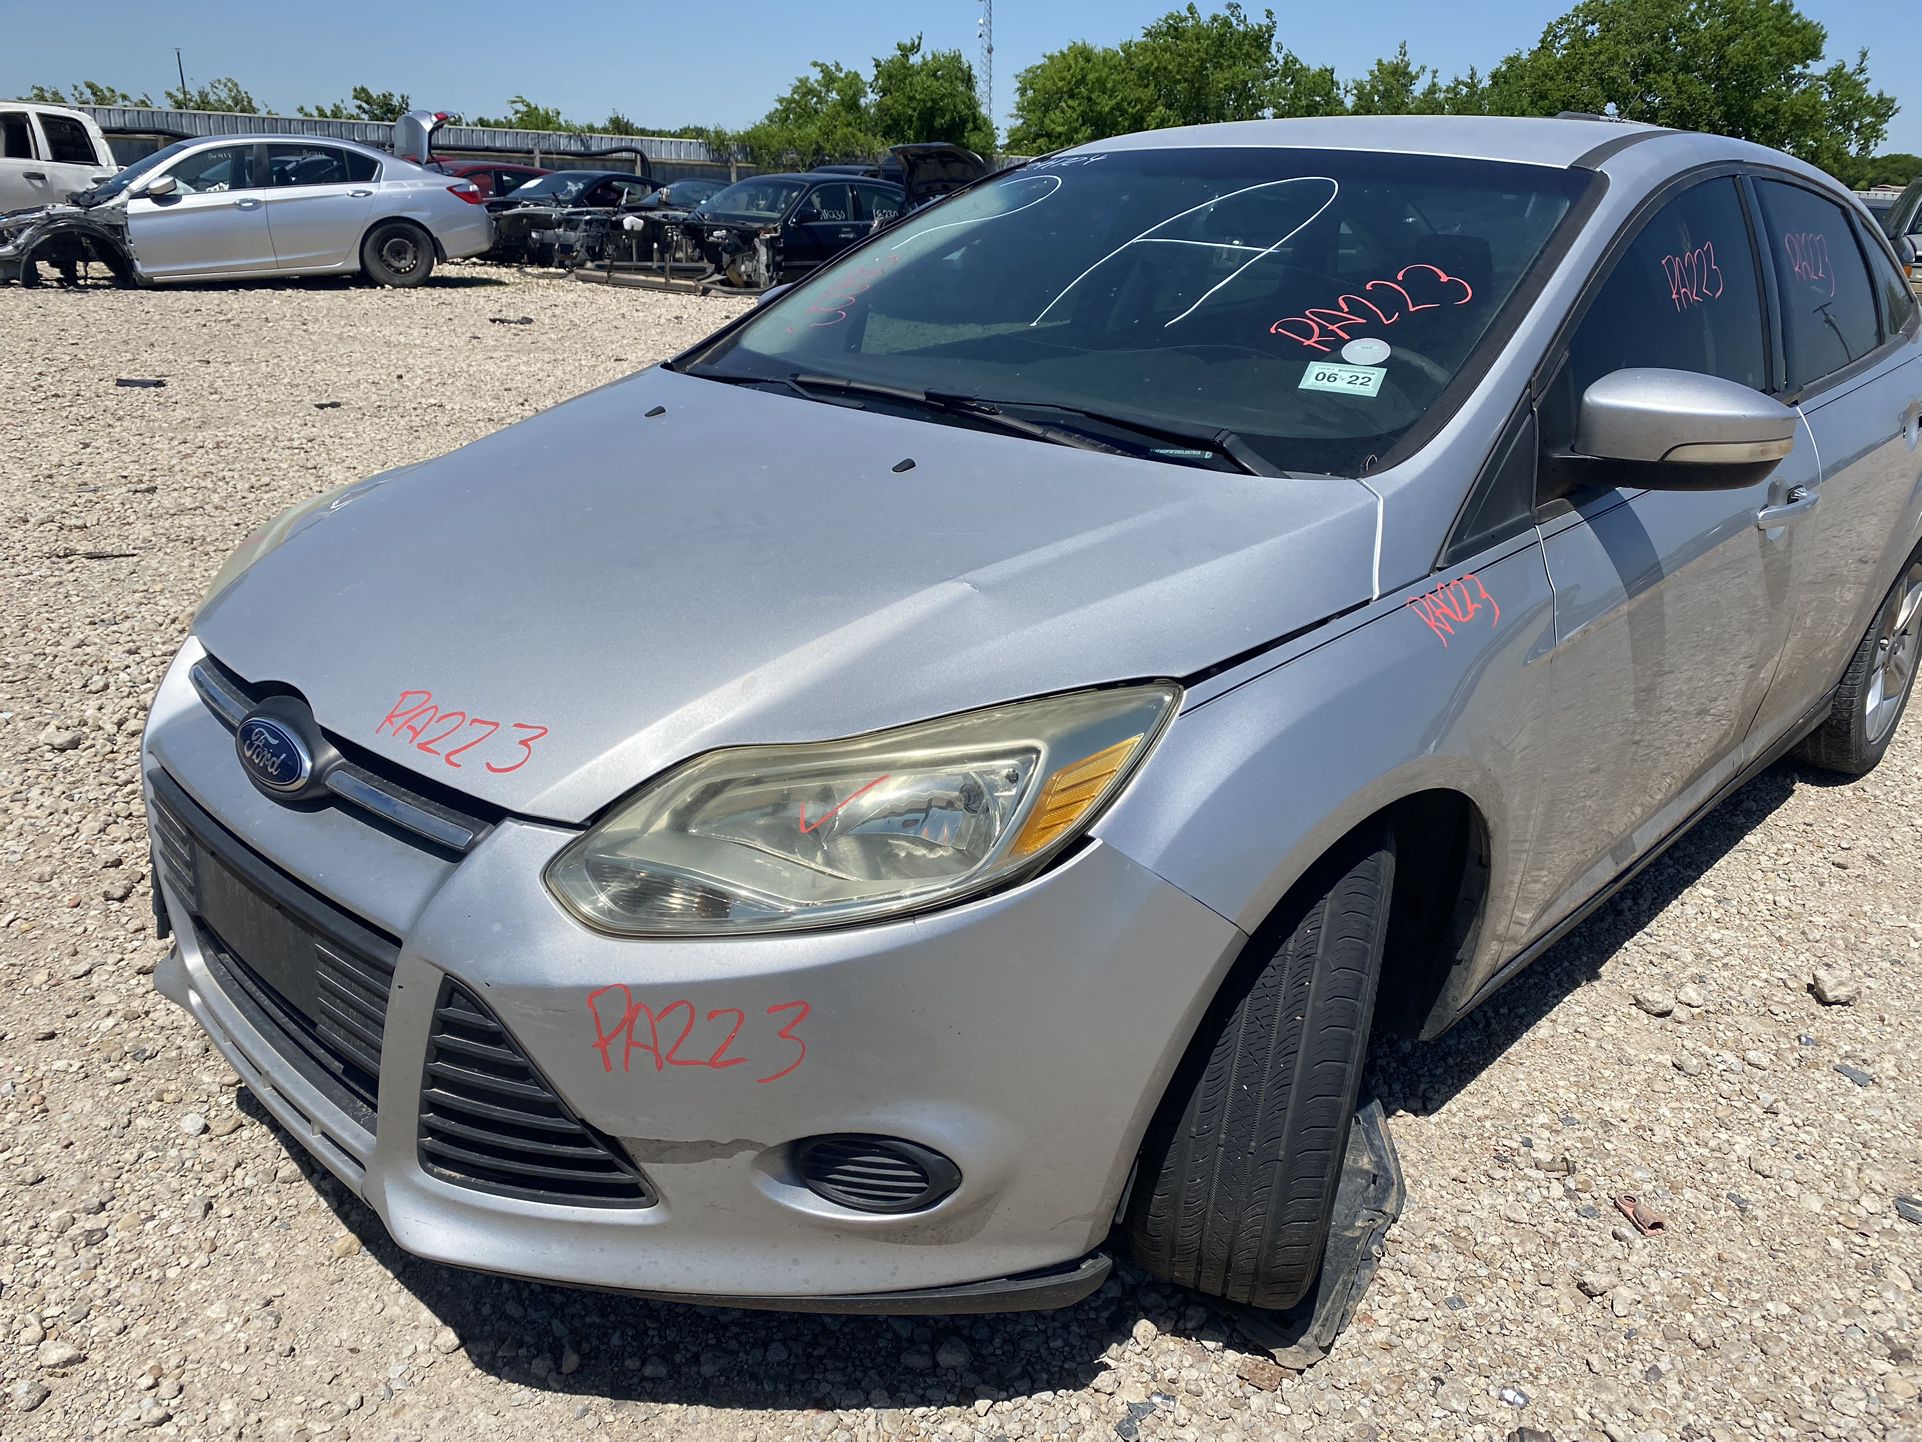 FOR PARTS ONLY 2014 ford focus SE 4 cyl 2.0L FWD / good transmission SOLO PARA PARTES FOCUS